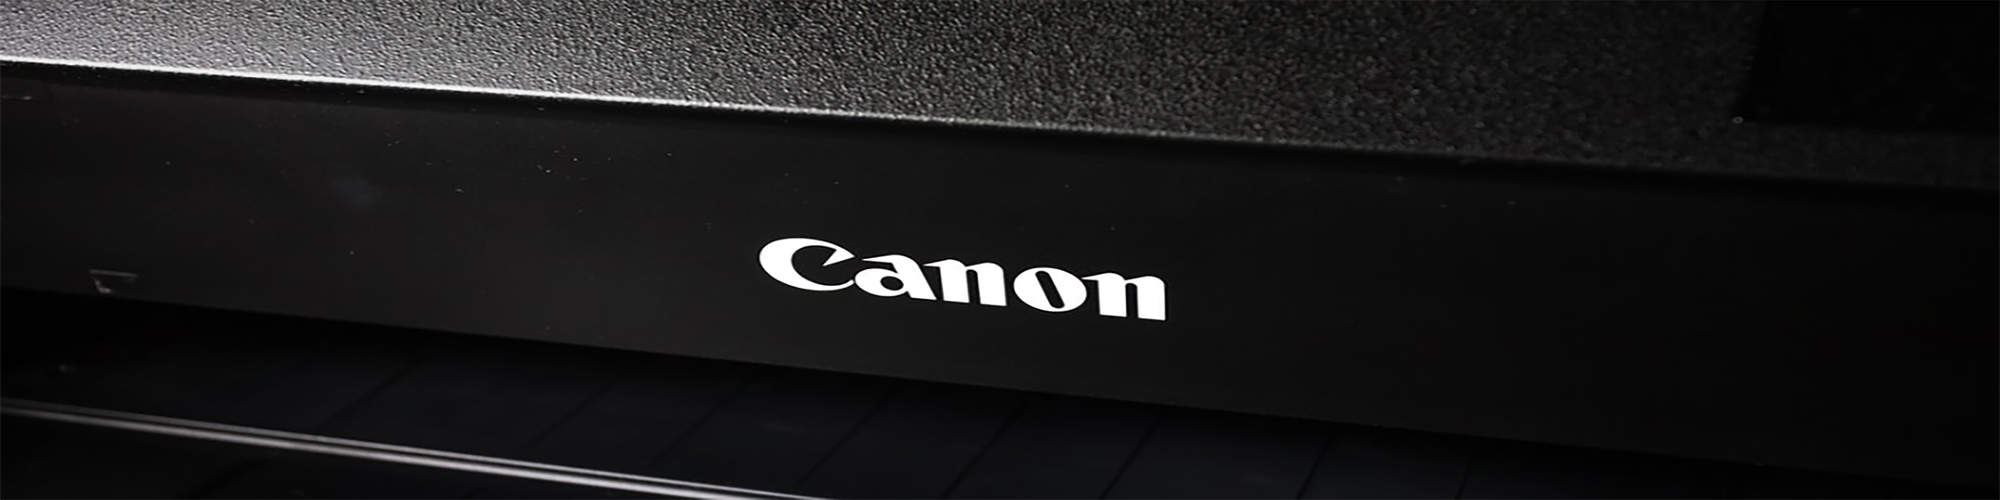 QRG - Canon Secure Printing User Guide